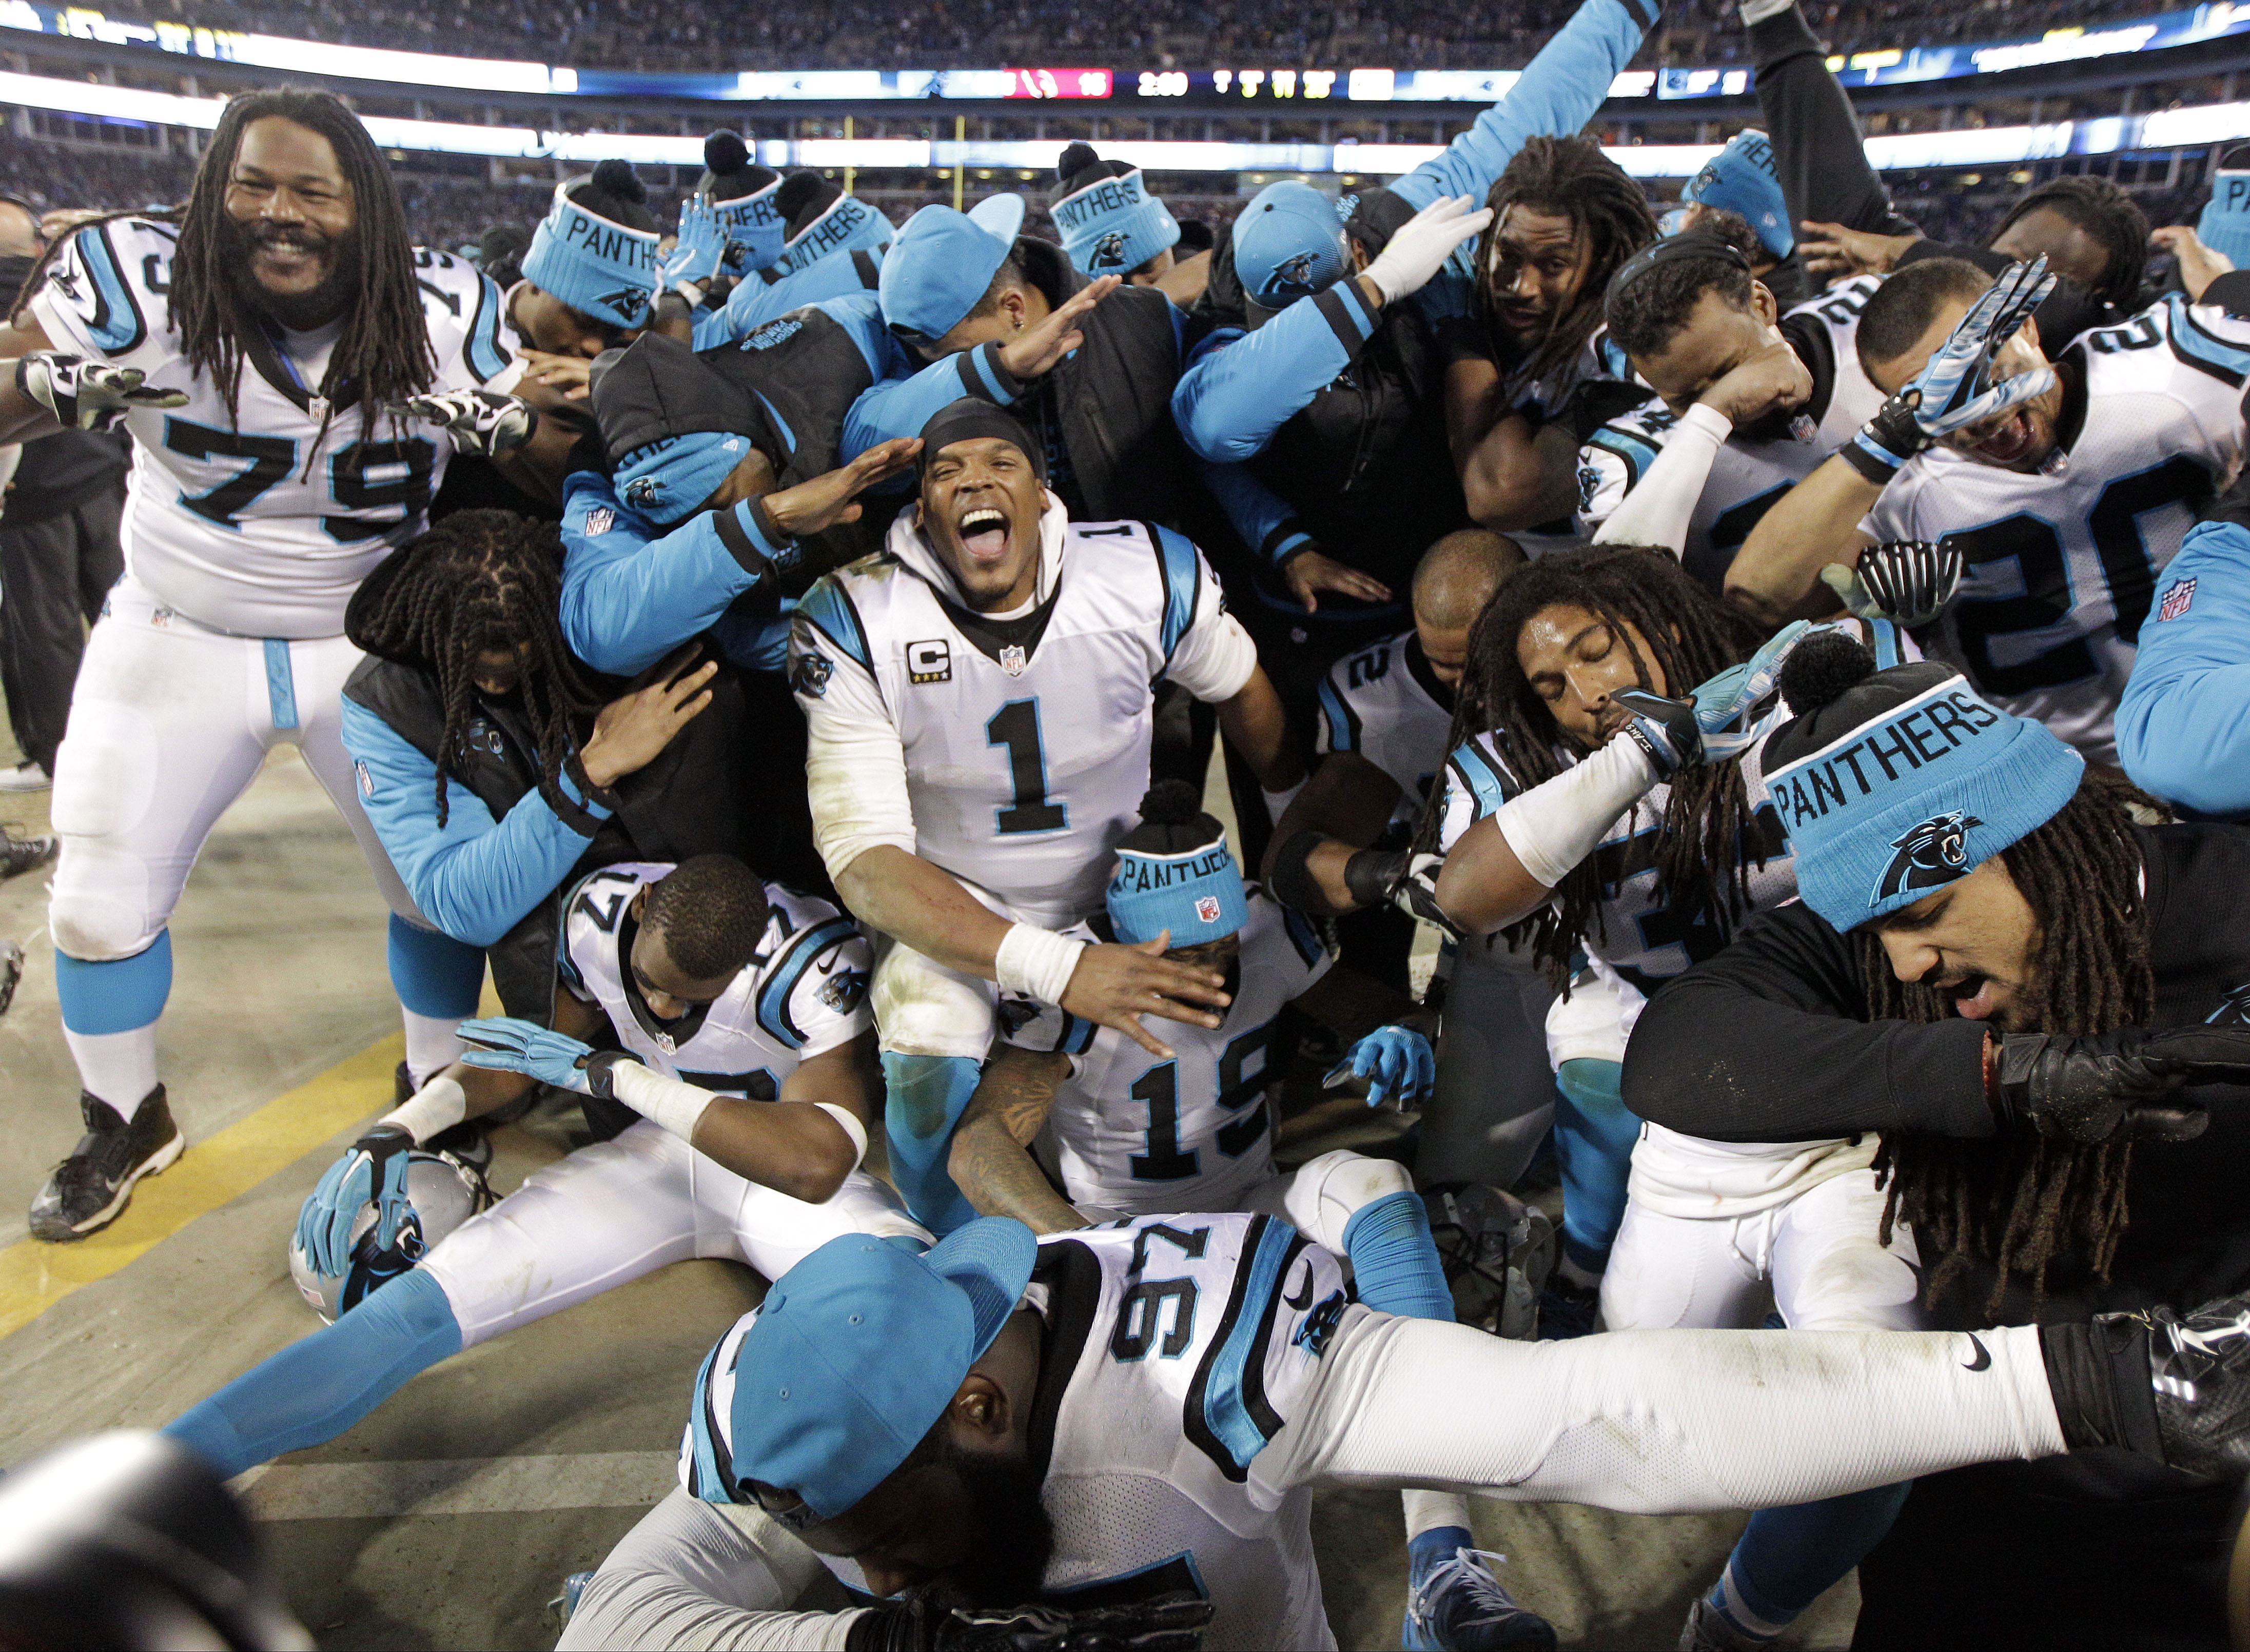 It's Panthers-Broncos in Super Bowl 50 - CBS News